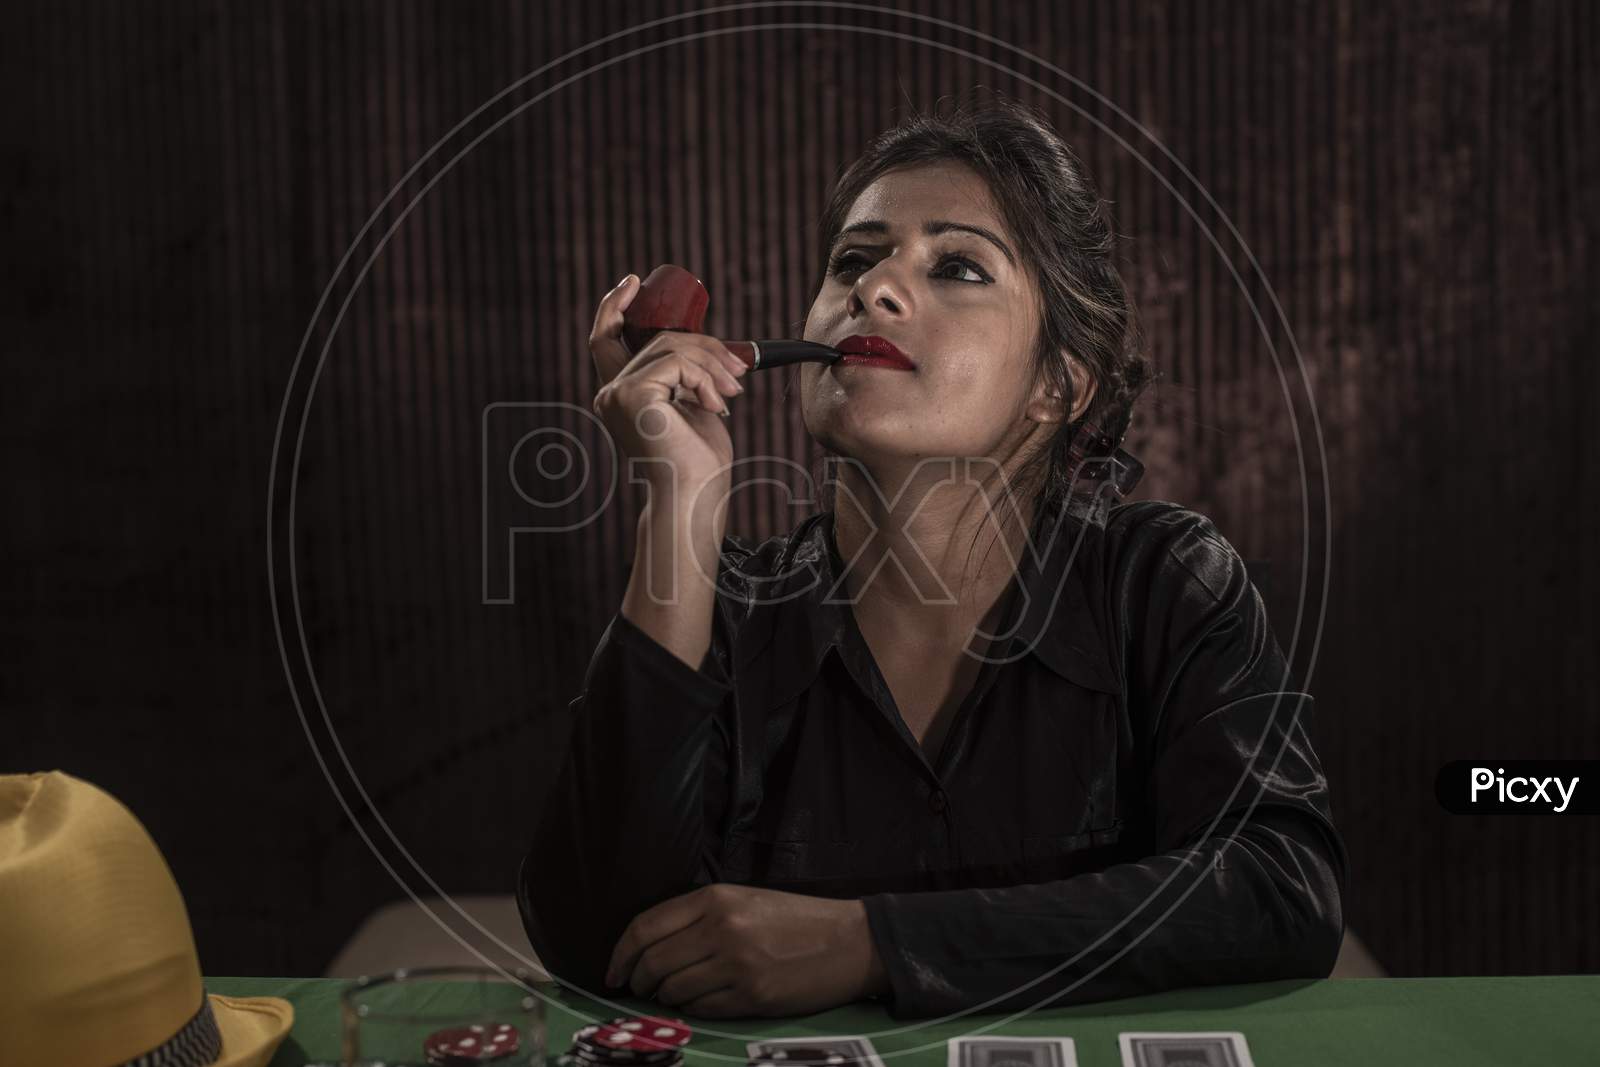 Young Indian Bengali brunette woman in western dress with pipe playing cards on a casino poker table in brown textured copy space studio background. Indian lifestyle and fashion.